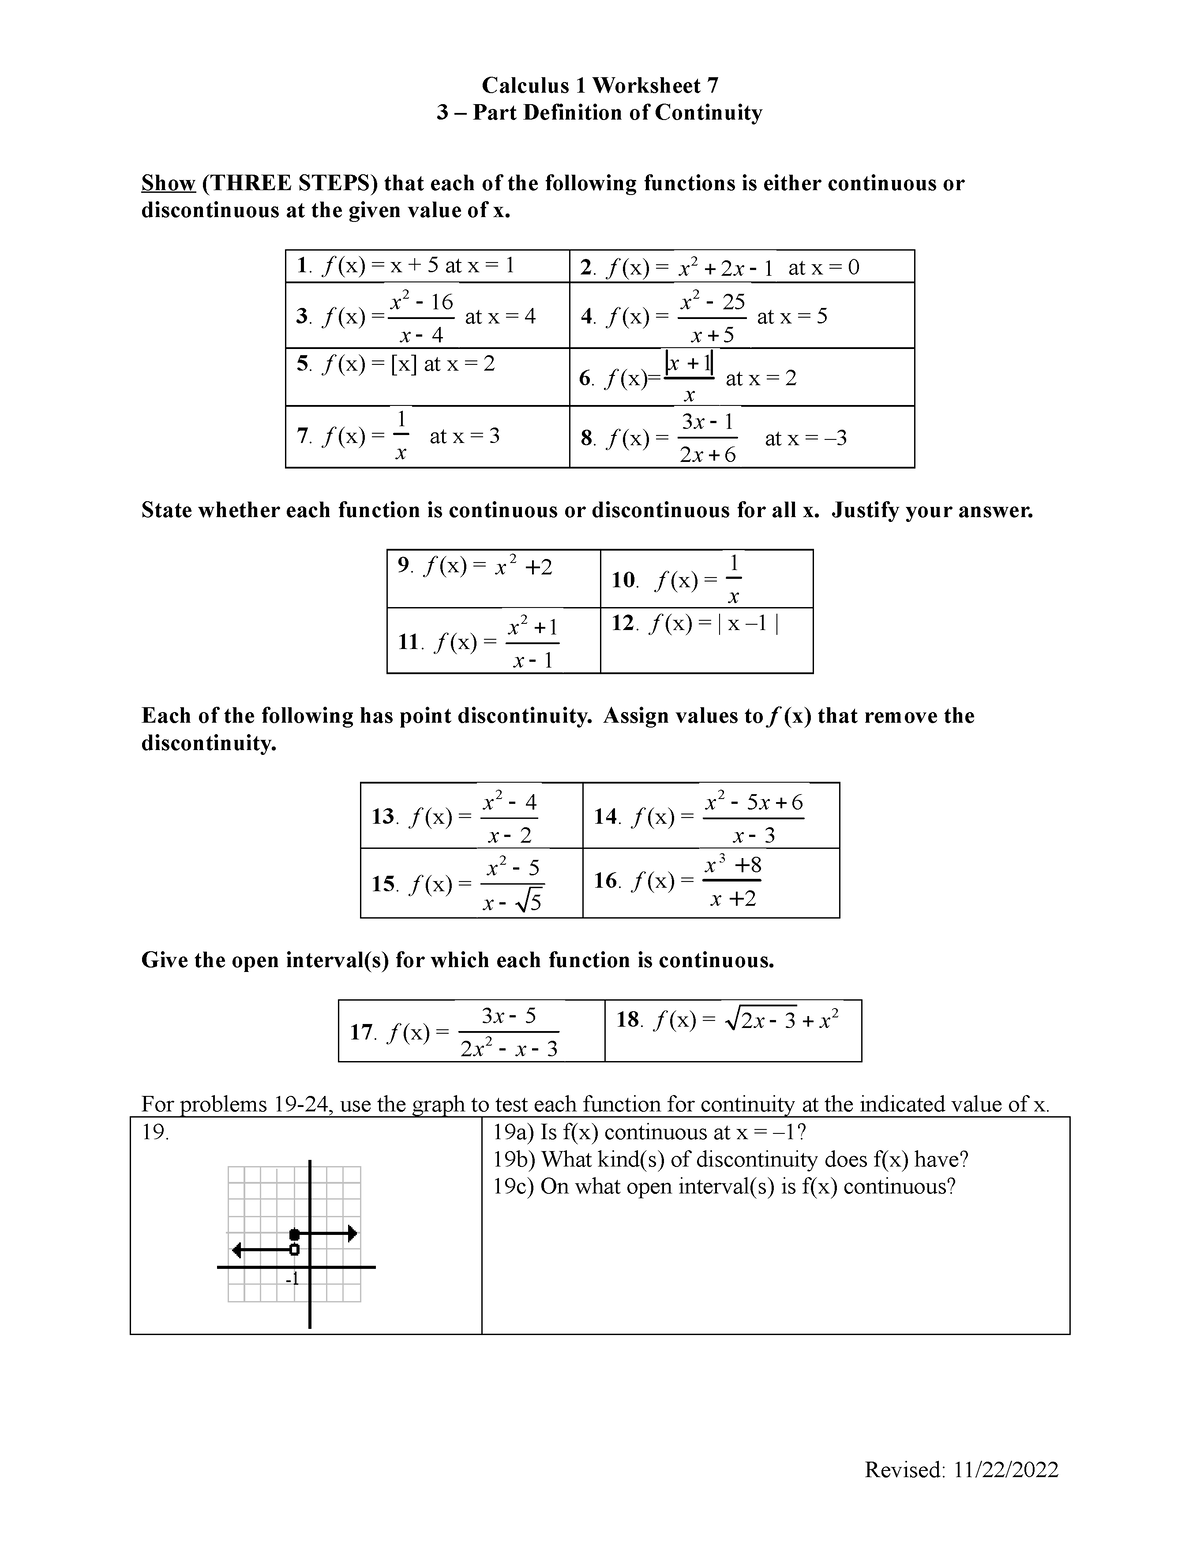 ab-ws-007-3-part-defintion-continuity-calculus-1-worksheet-7-3-part-definition-of-continuity